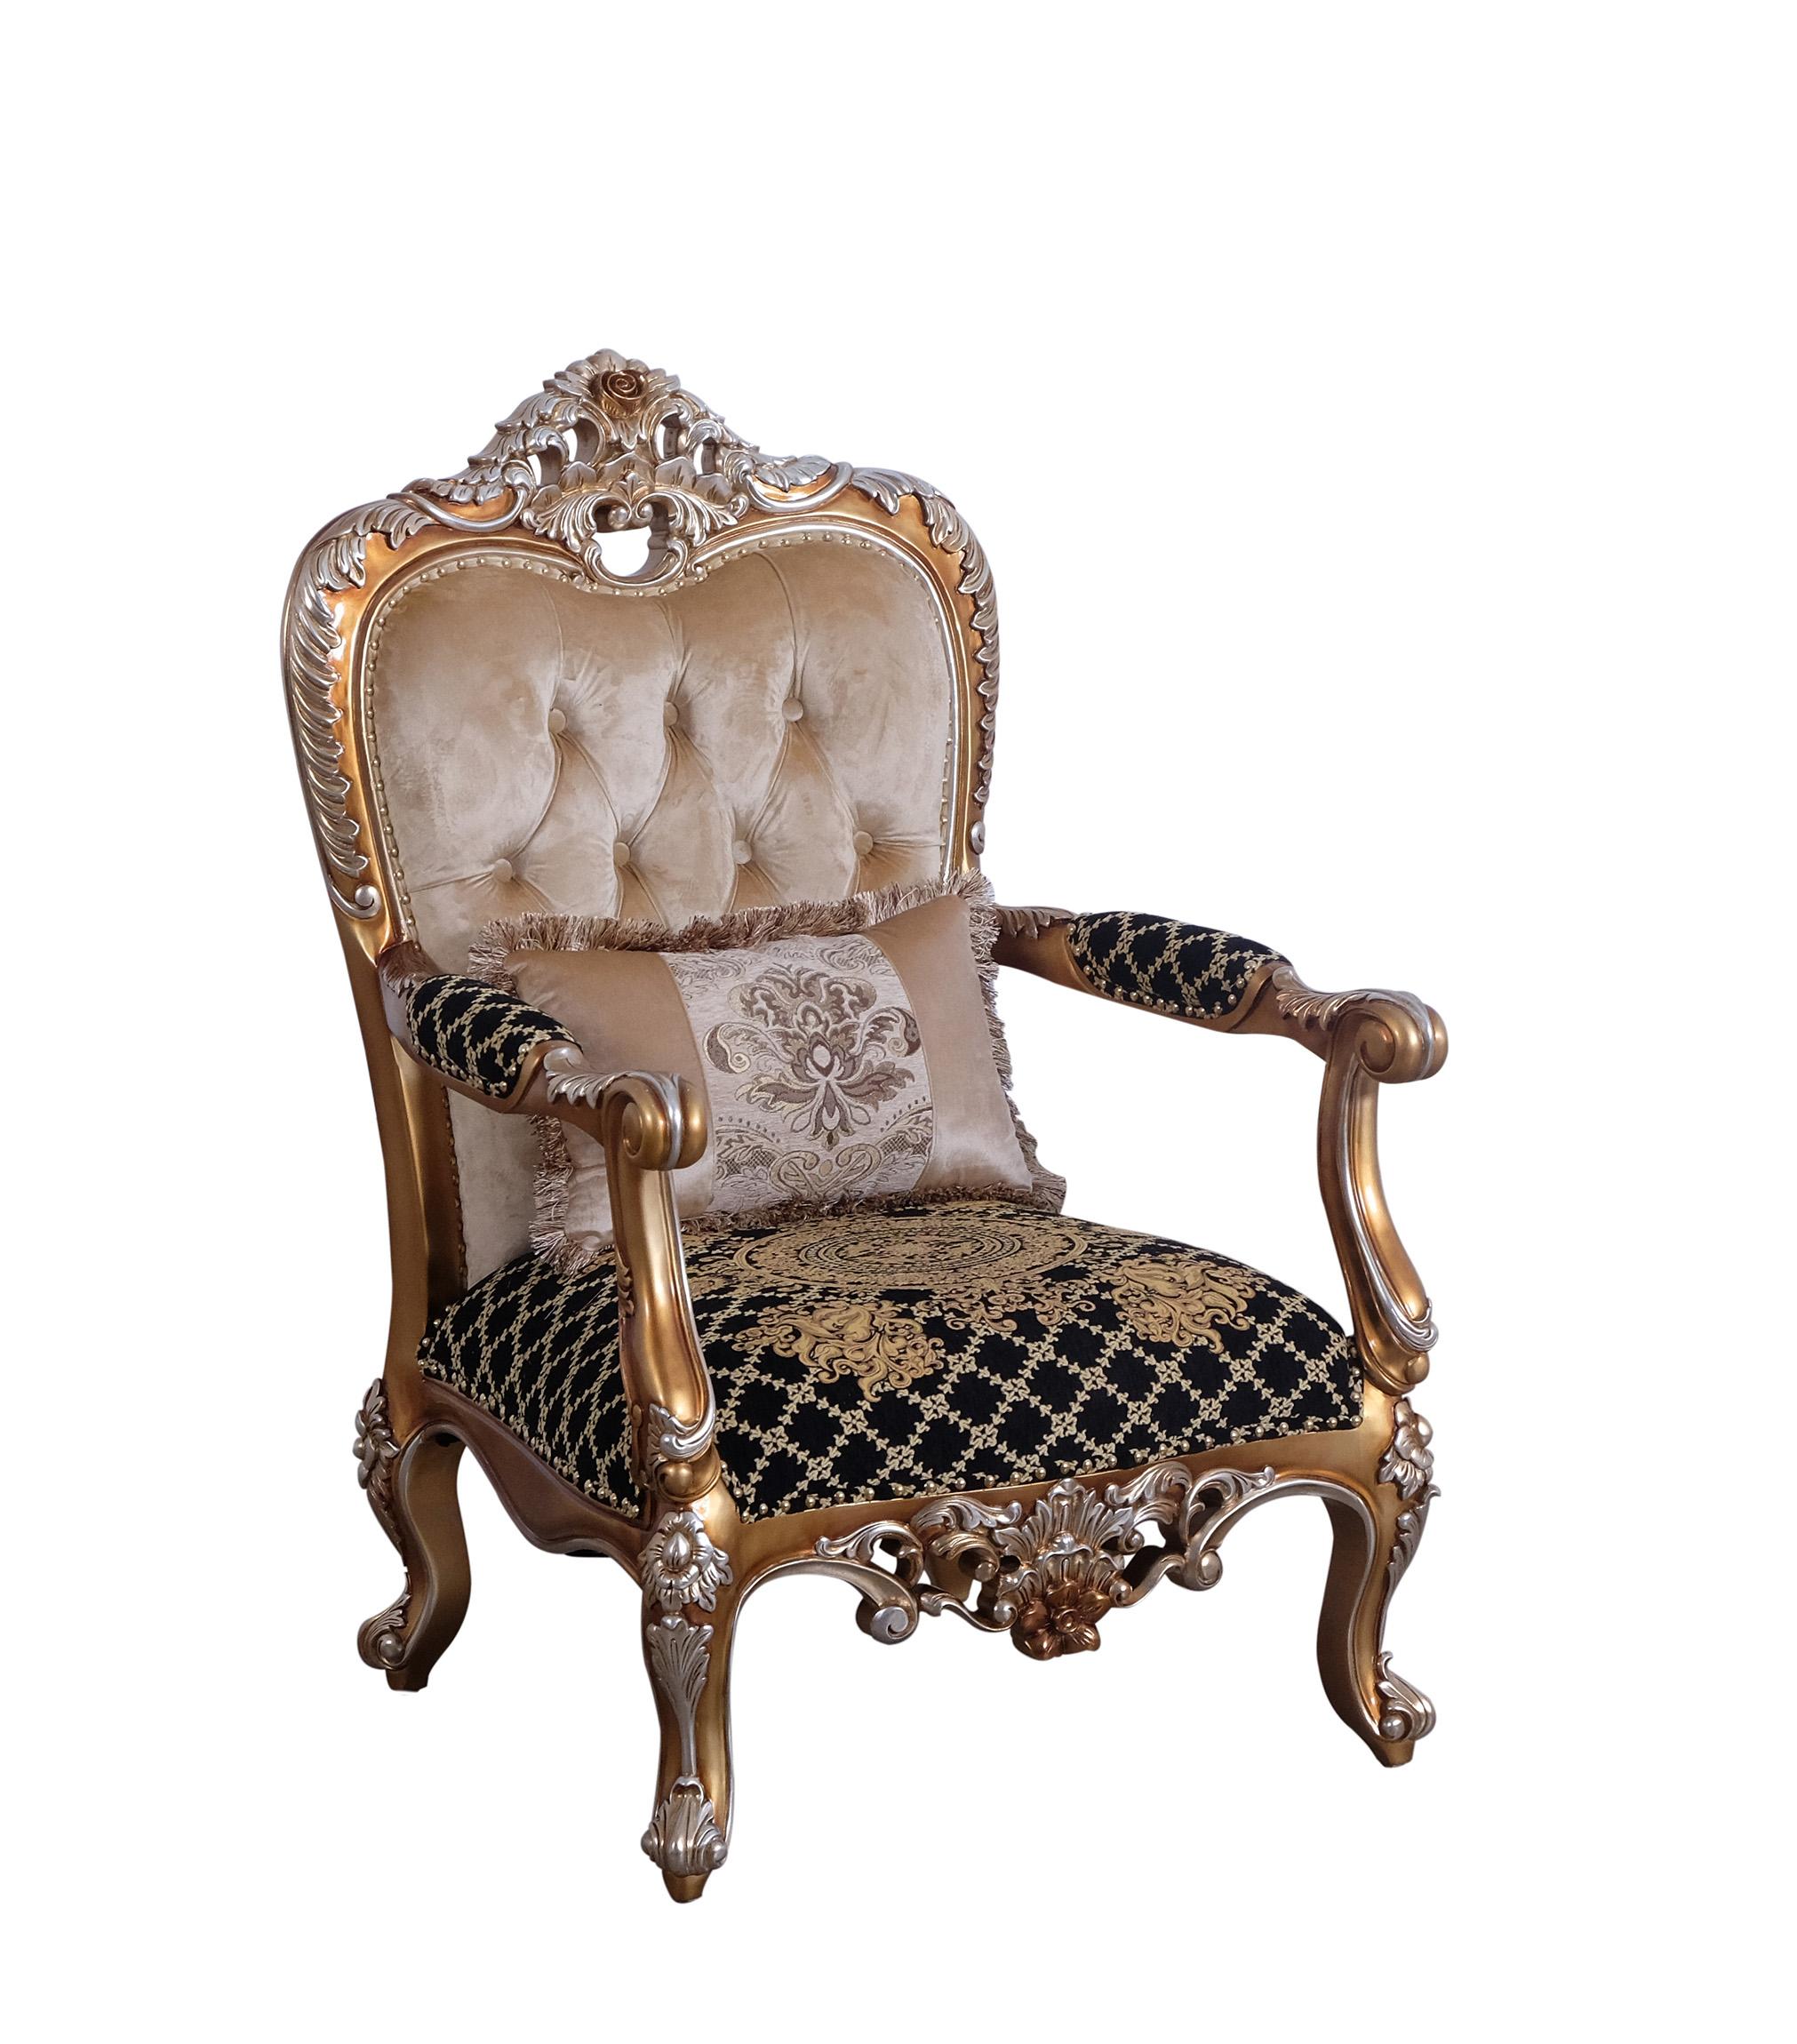 Classic, Traditional Arm Chair SAINT GERMAIN II 35552-C in Sand, Gold, Black Fabric